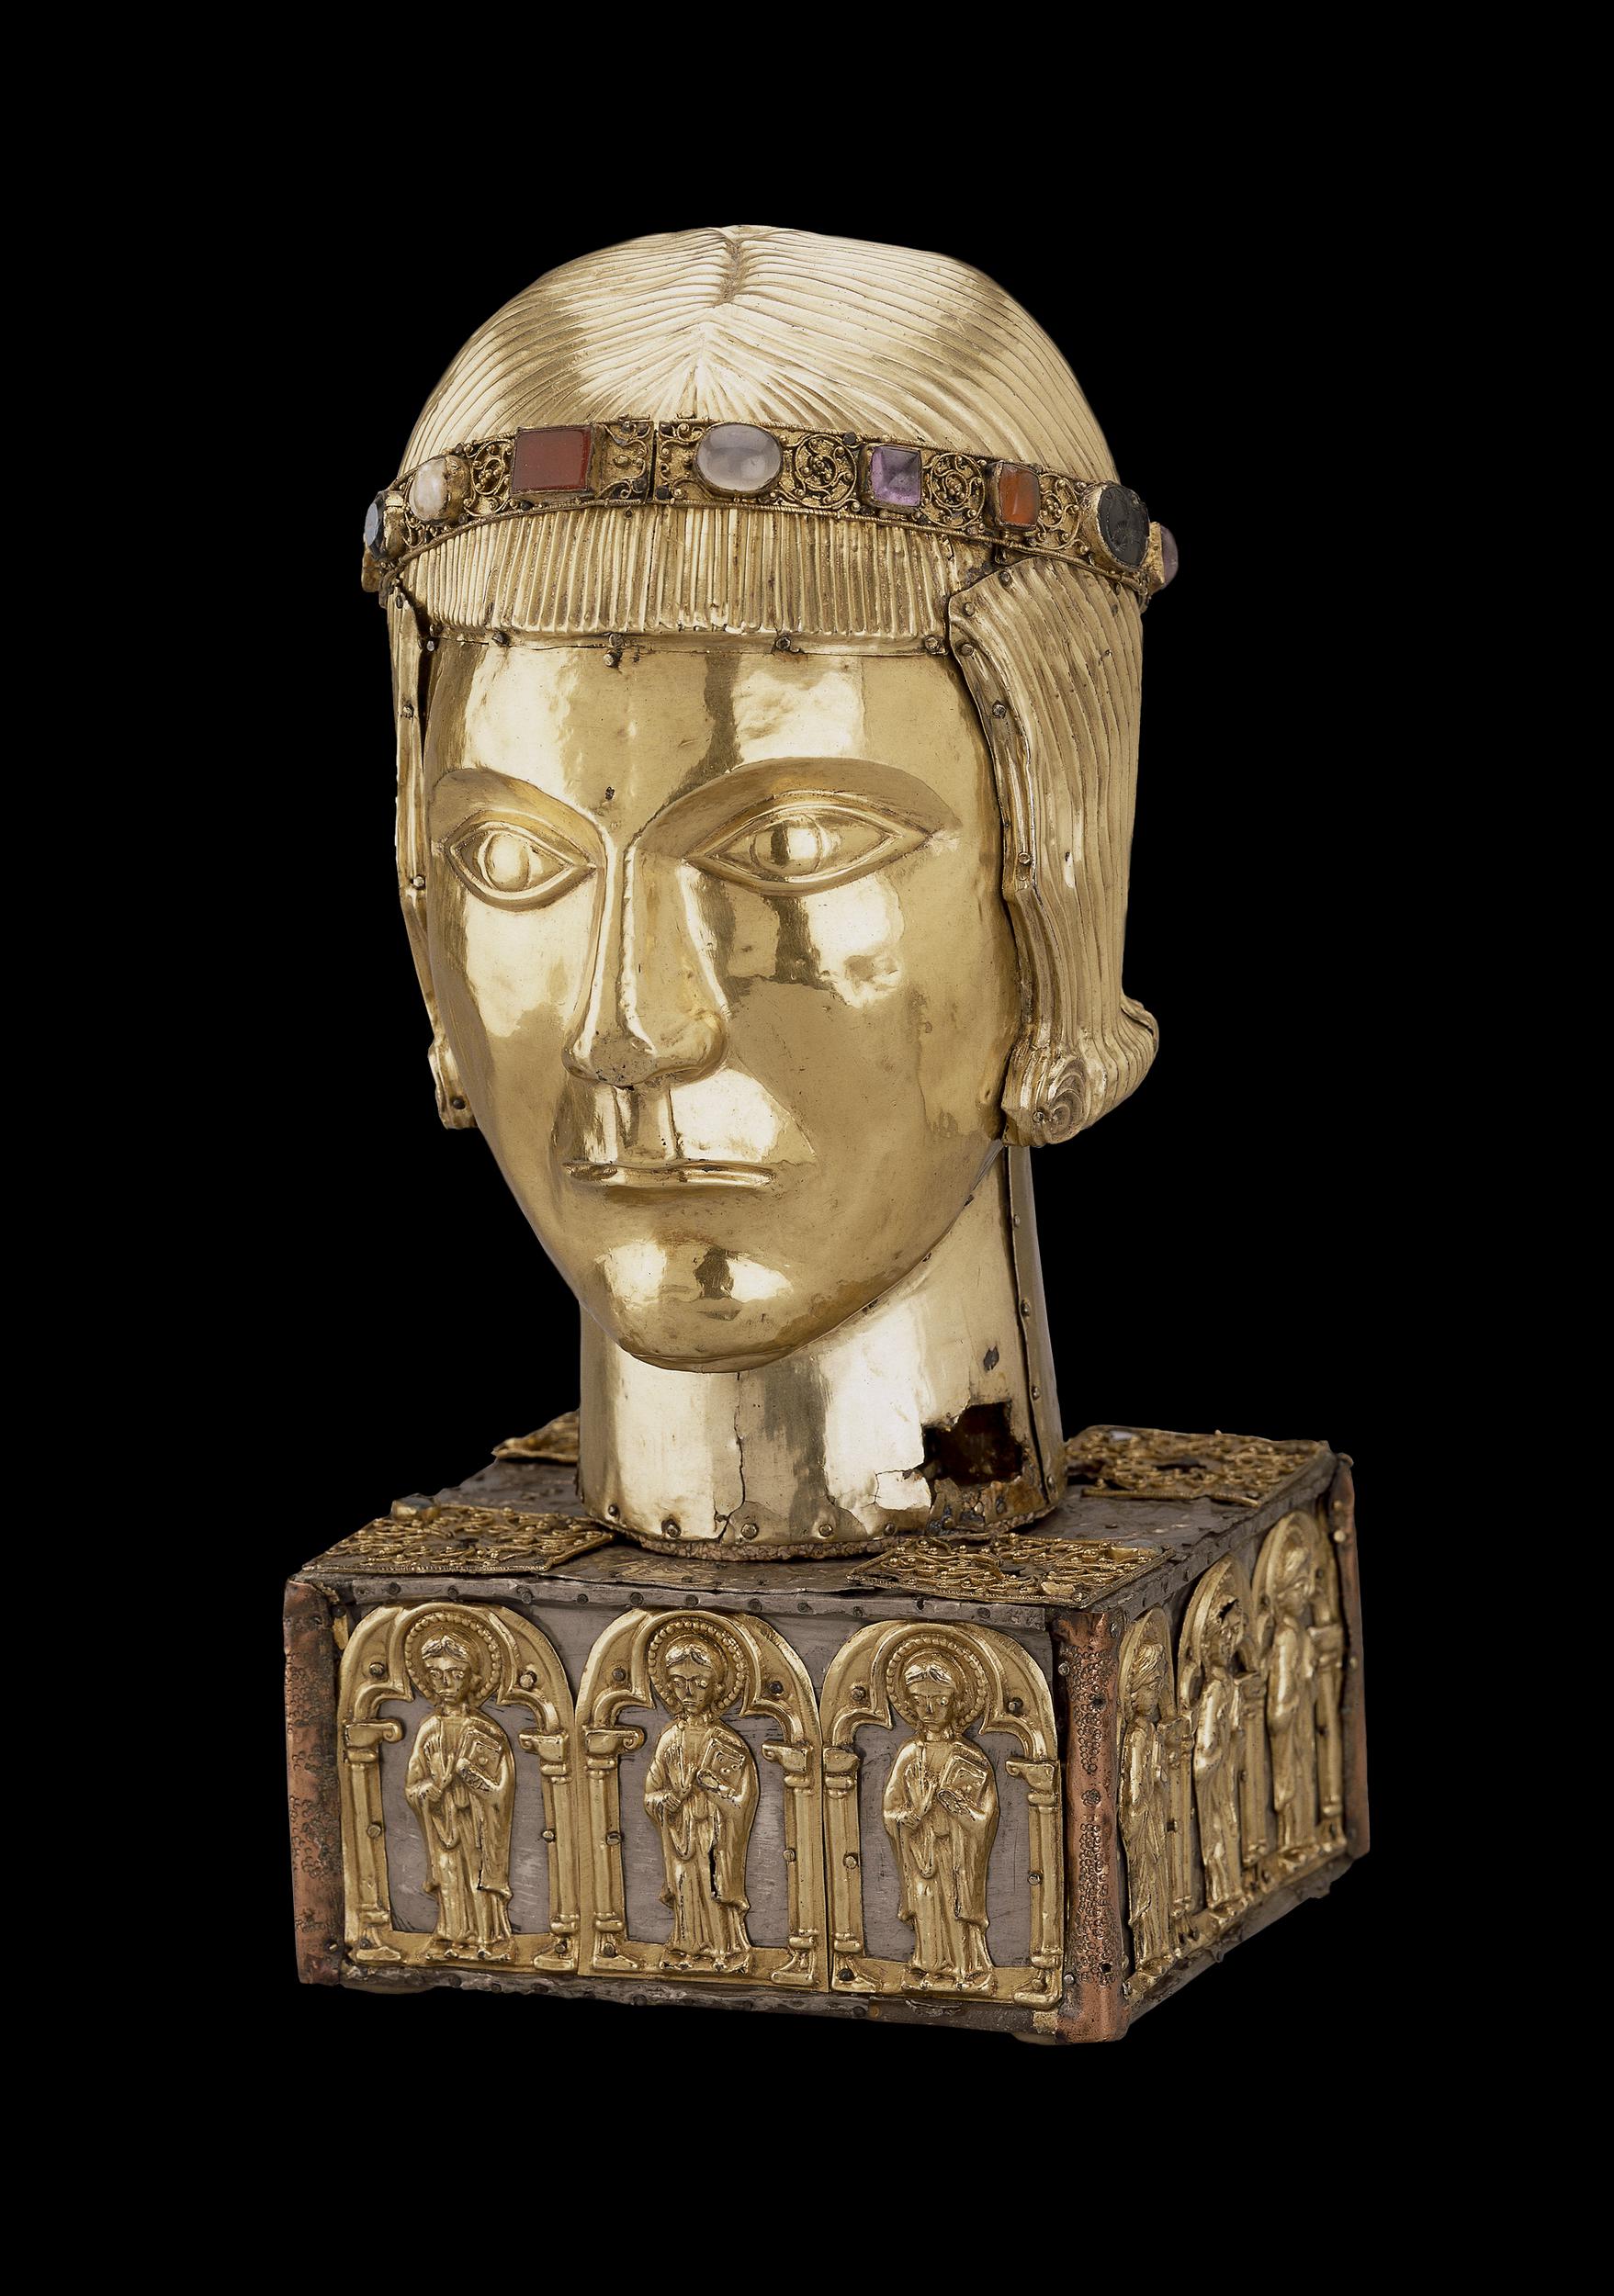 Head reliquary of St. Eustace, made in Basel around 1180-1200 CE.jpg